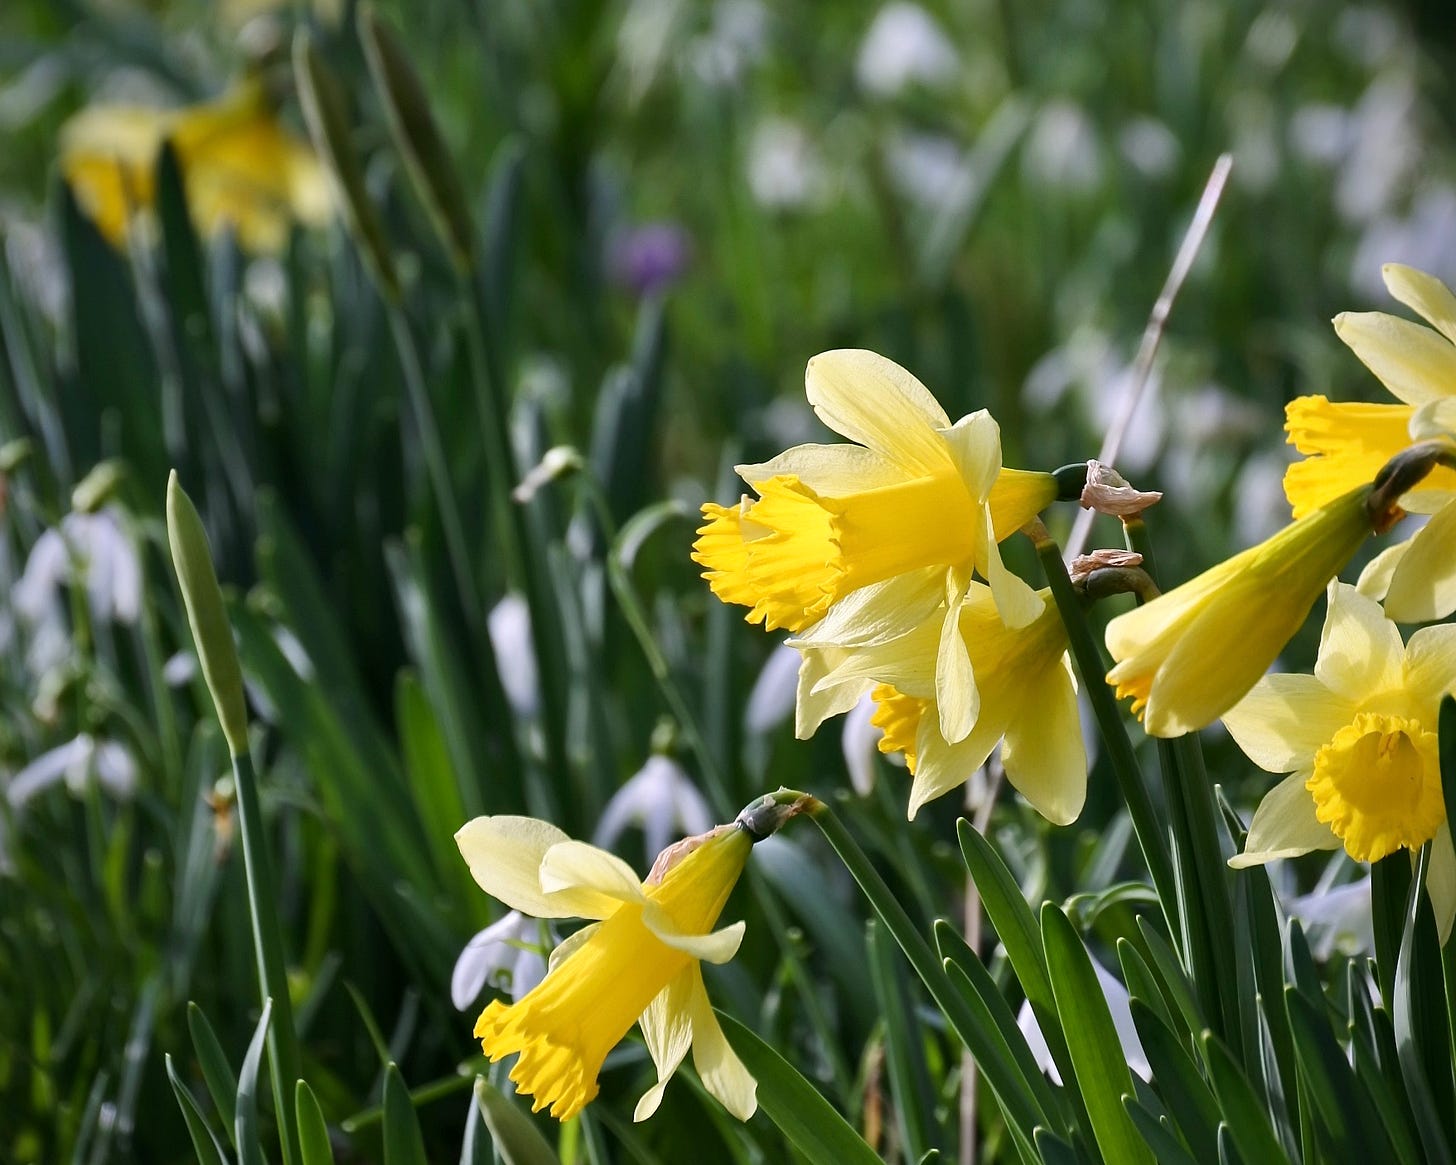 Daffodils stand out amidst the snowdrops